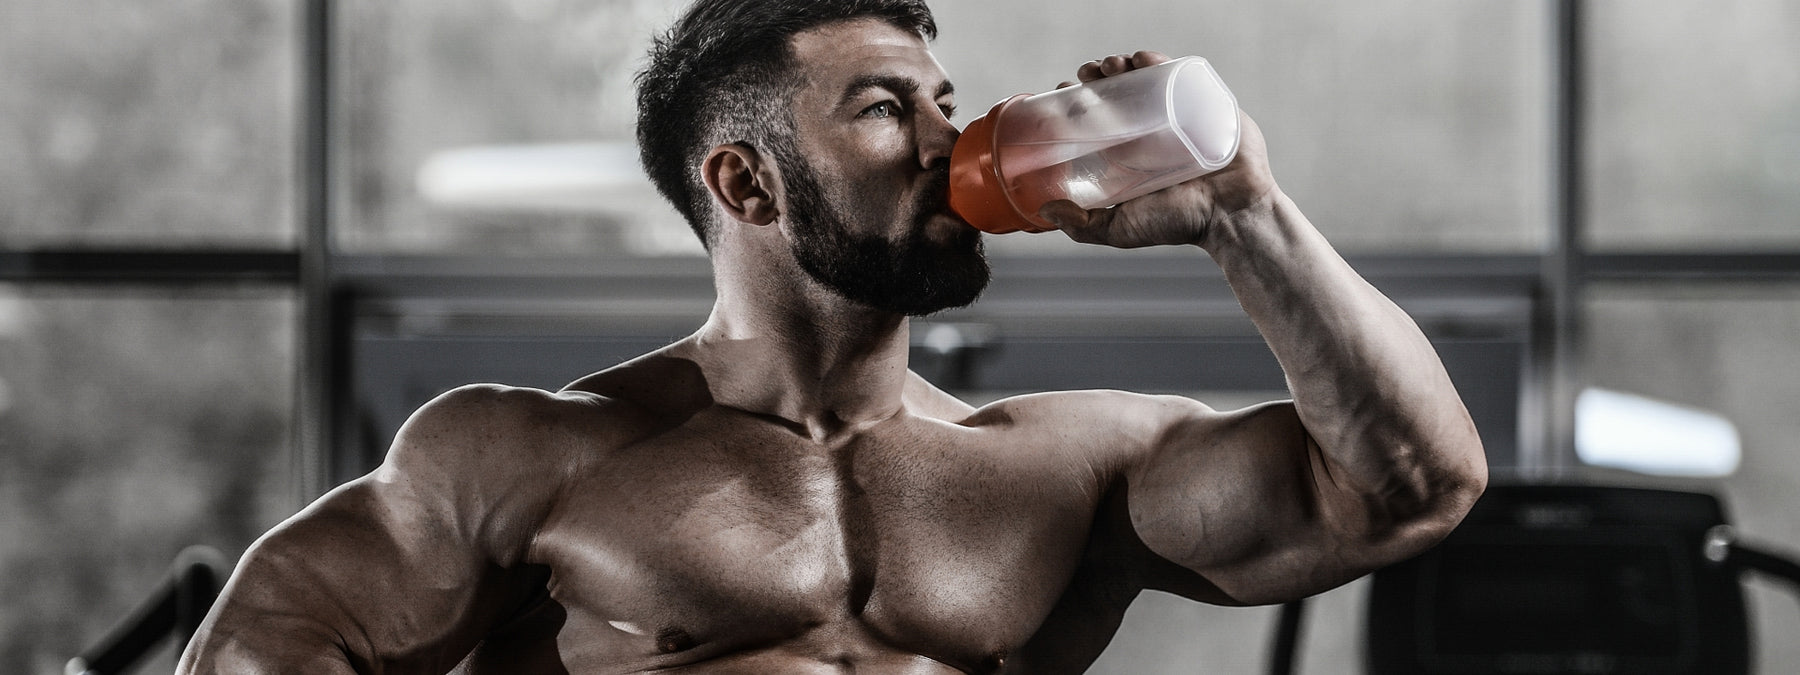 Build Muscle With These 16 Research-Backed Tips